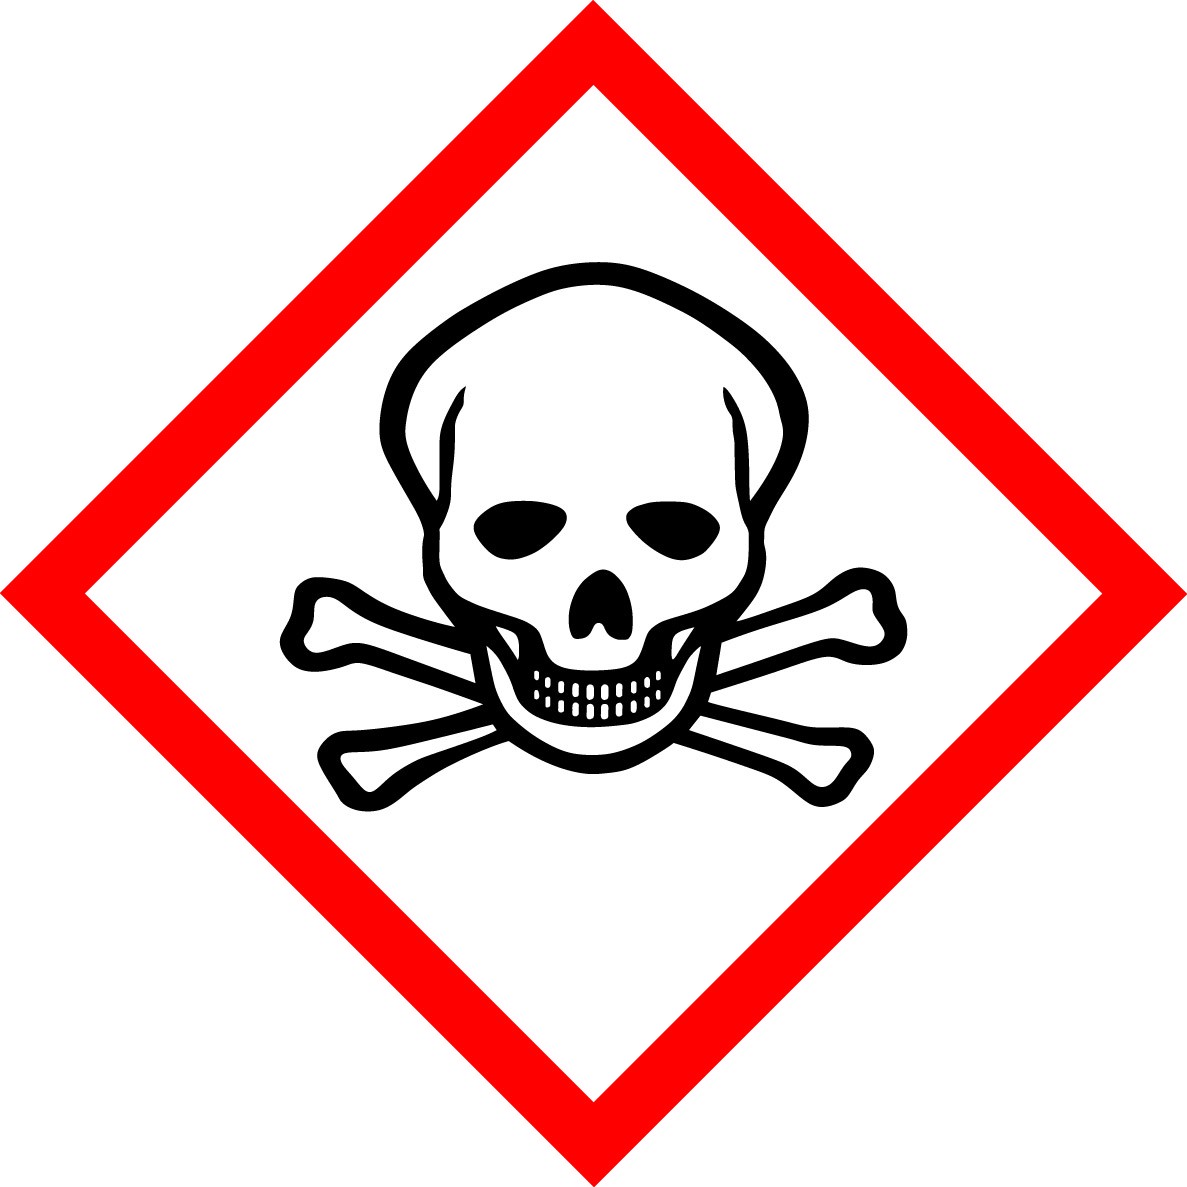 The day I was asked to poison someone – SBNS Blog